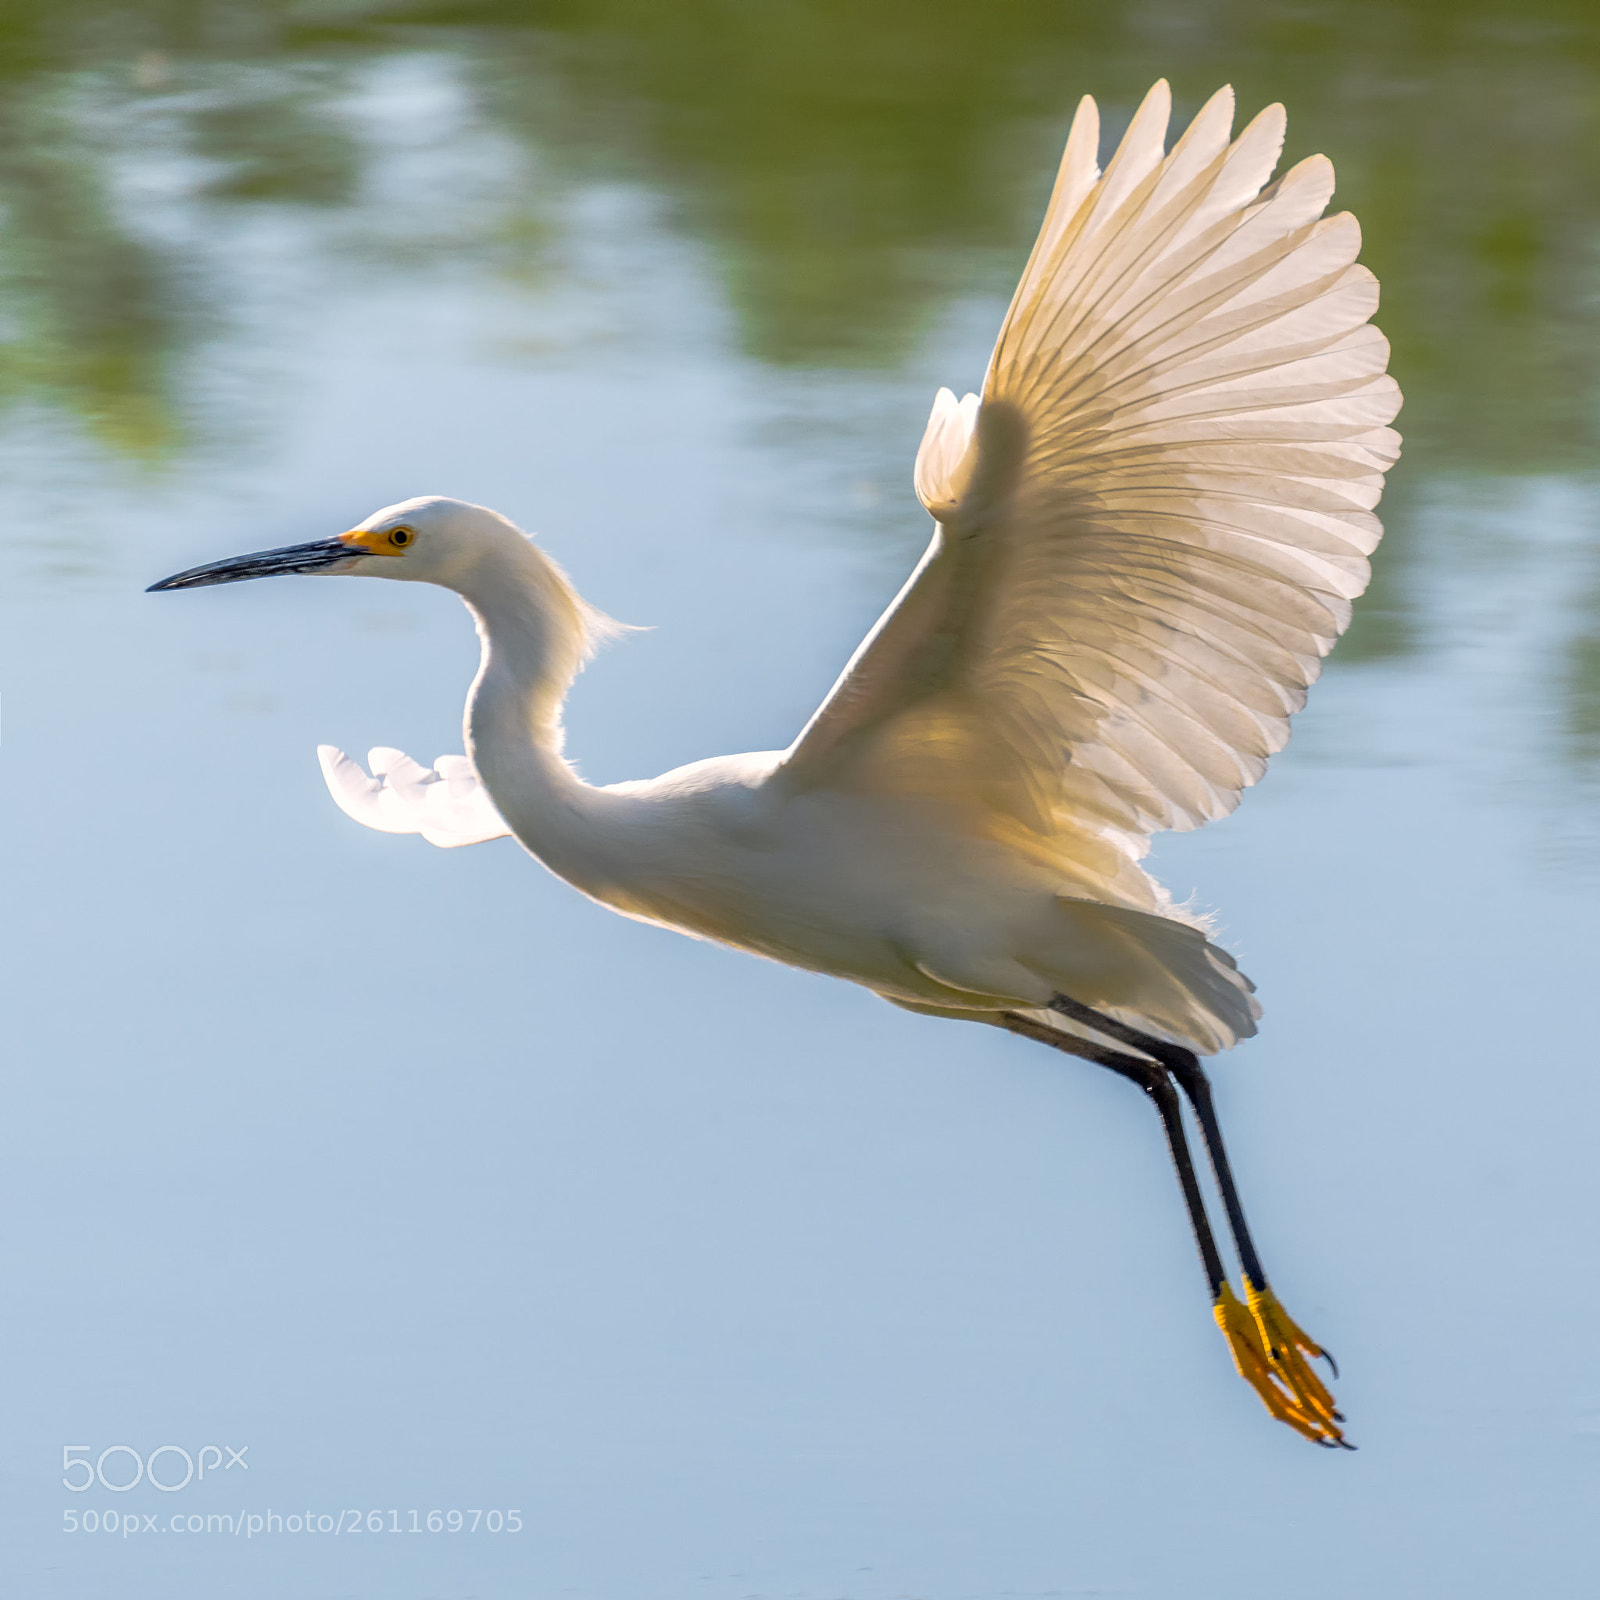 Nikon D750 sample photo. Snowy egret fly by photography